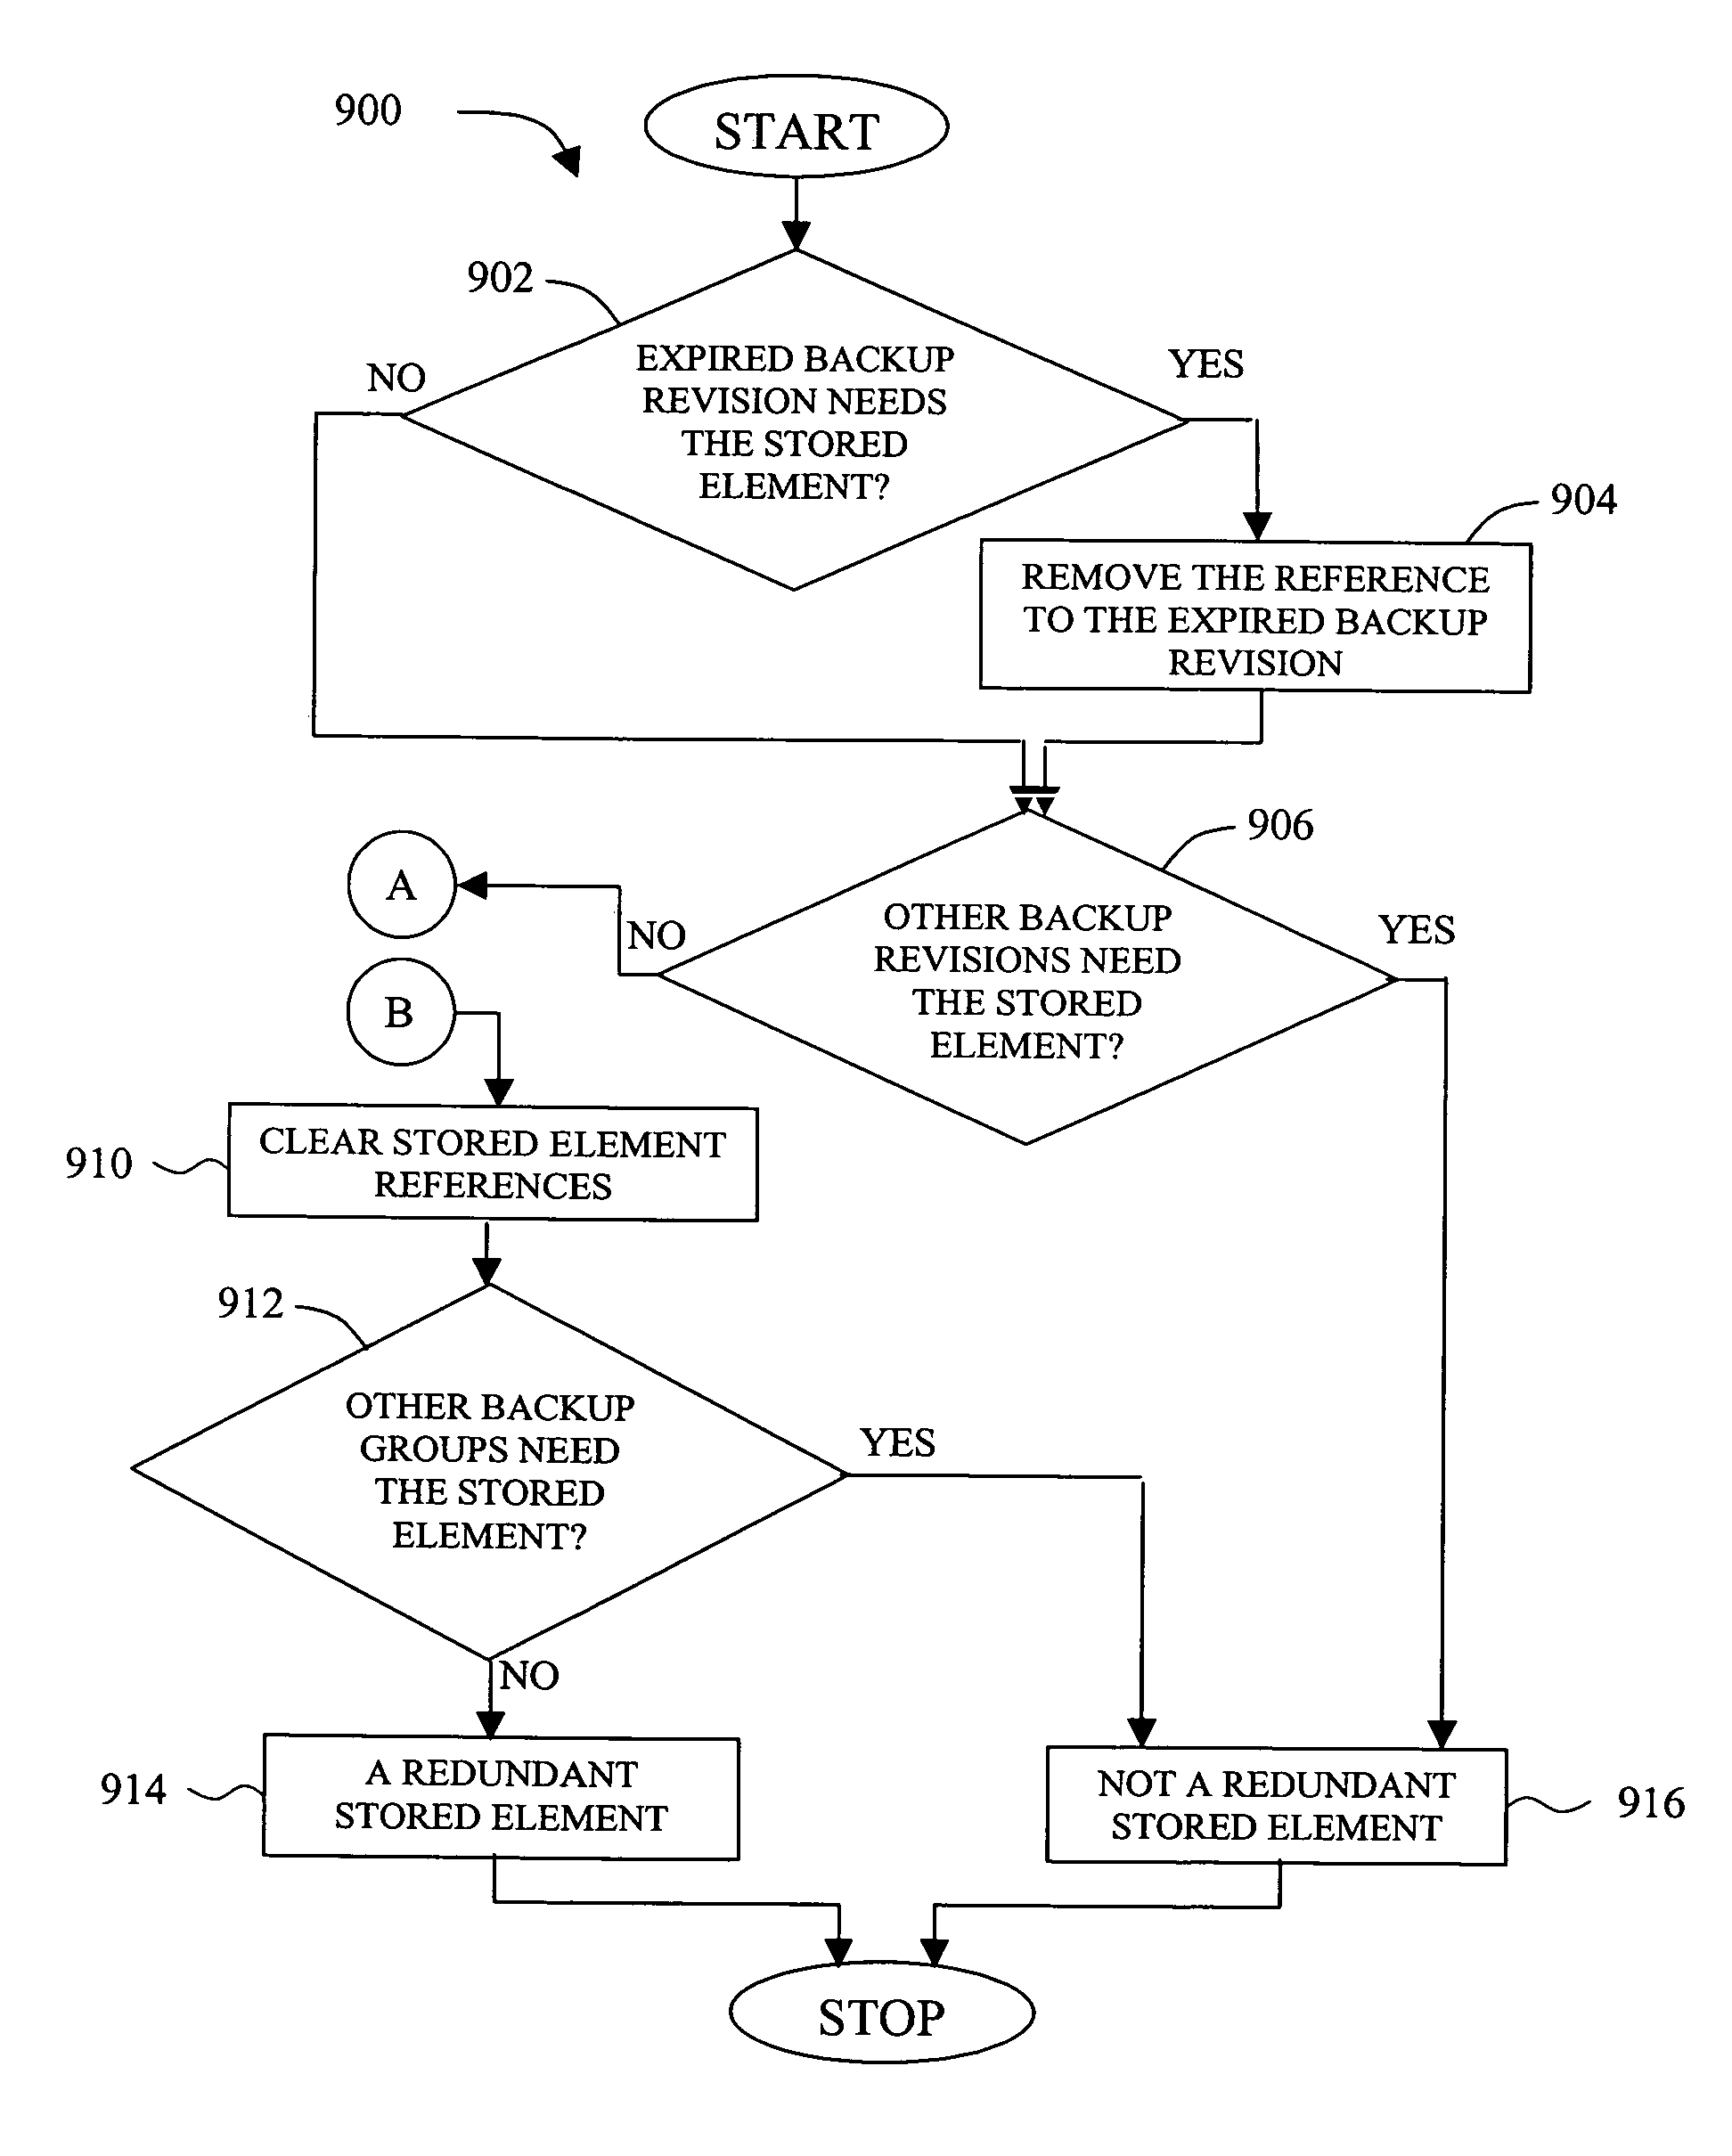 System and methods for efficiently managing incremental data backup revisions